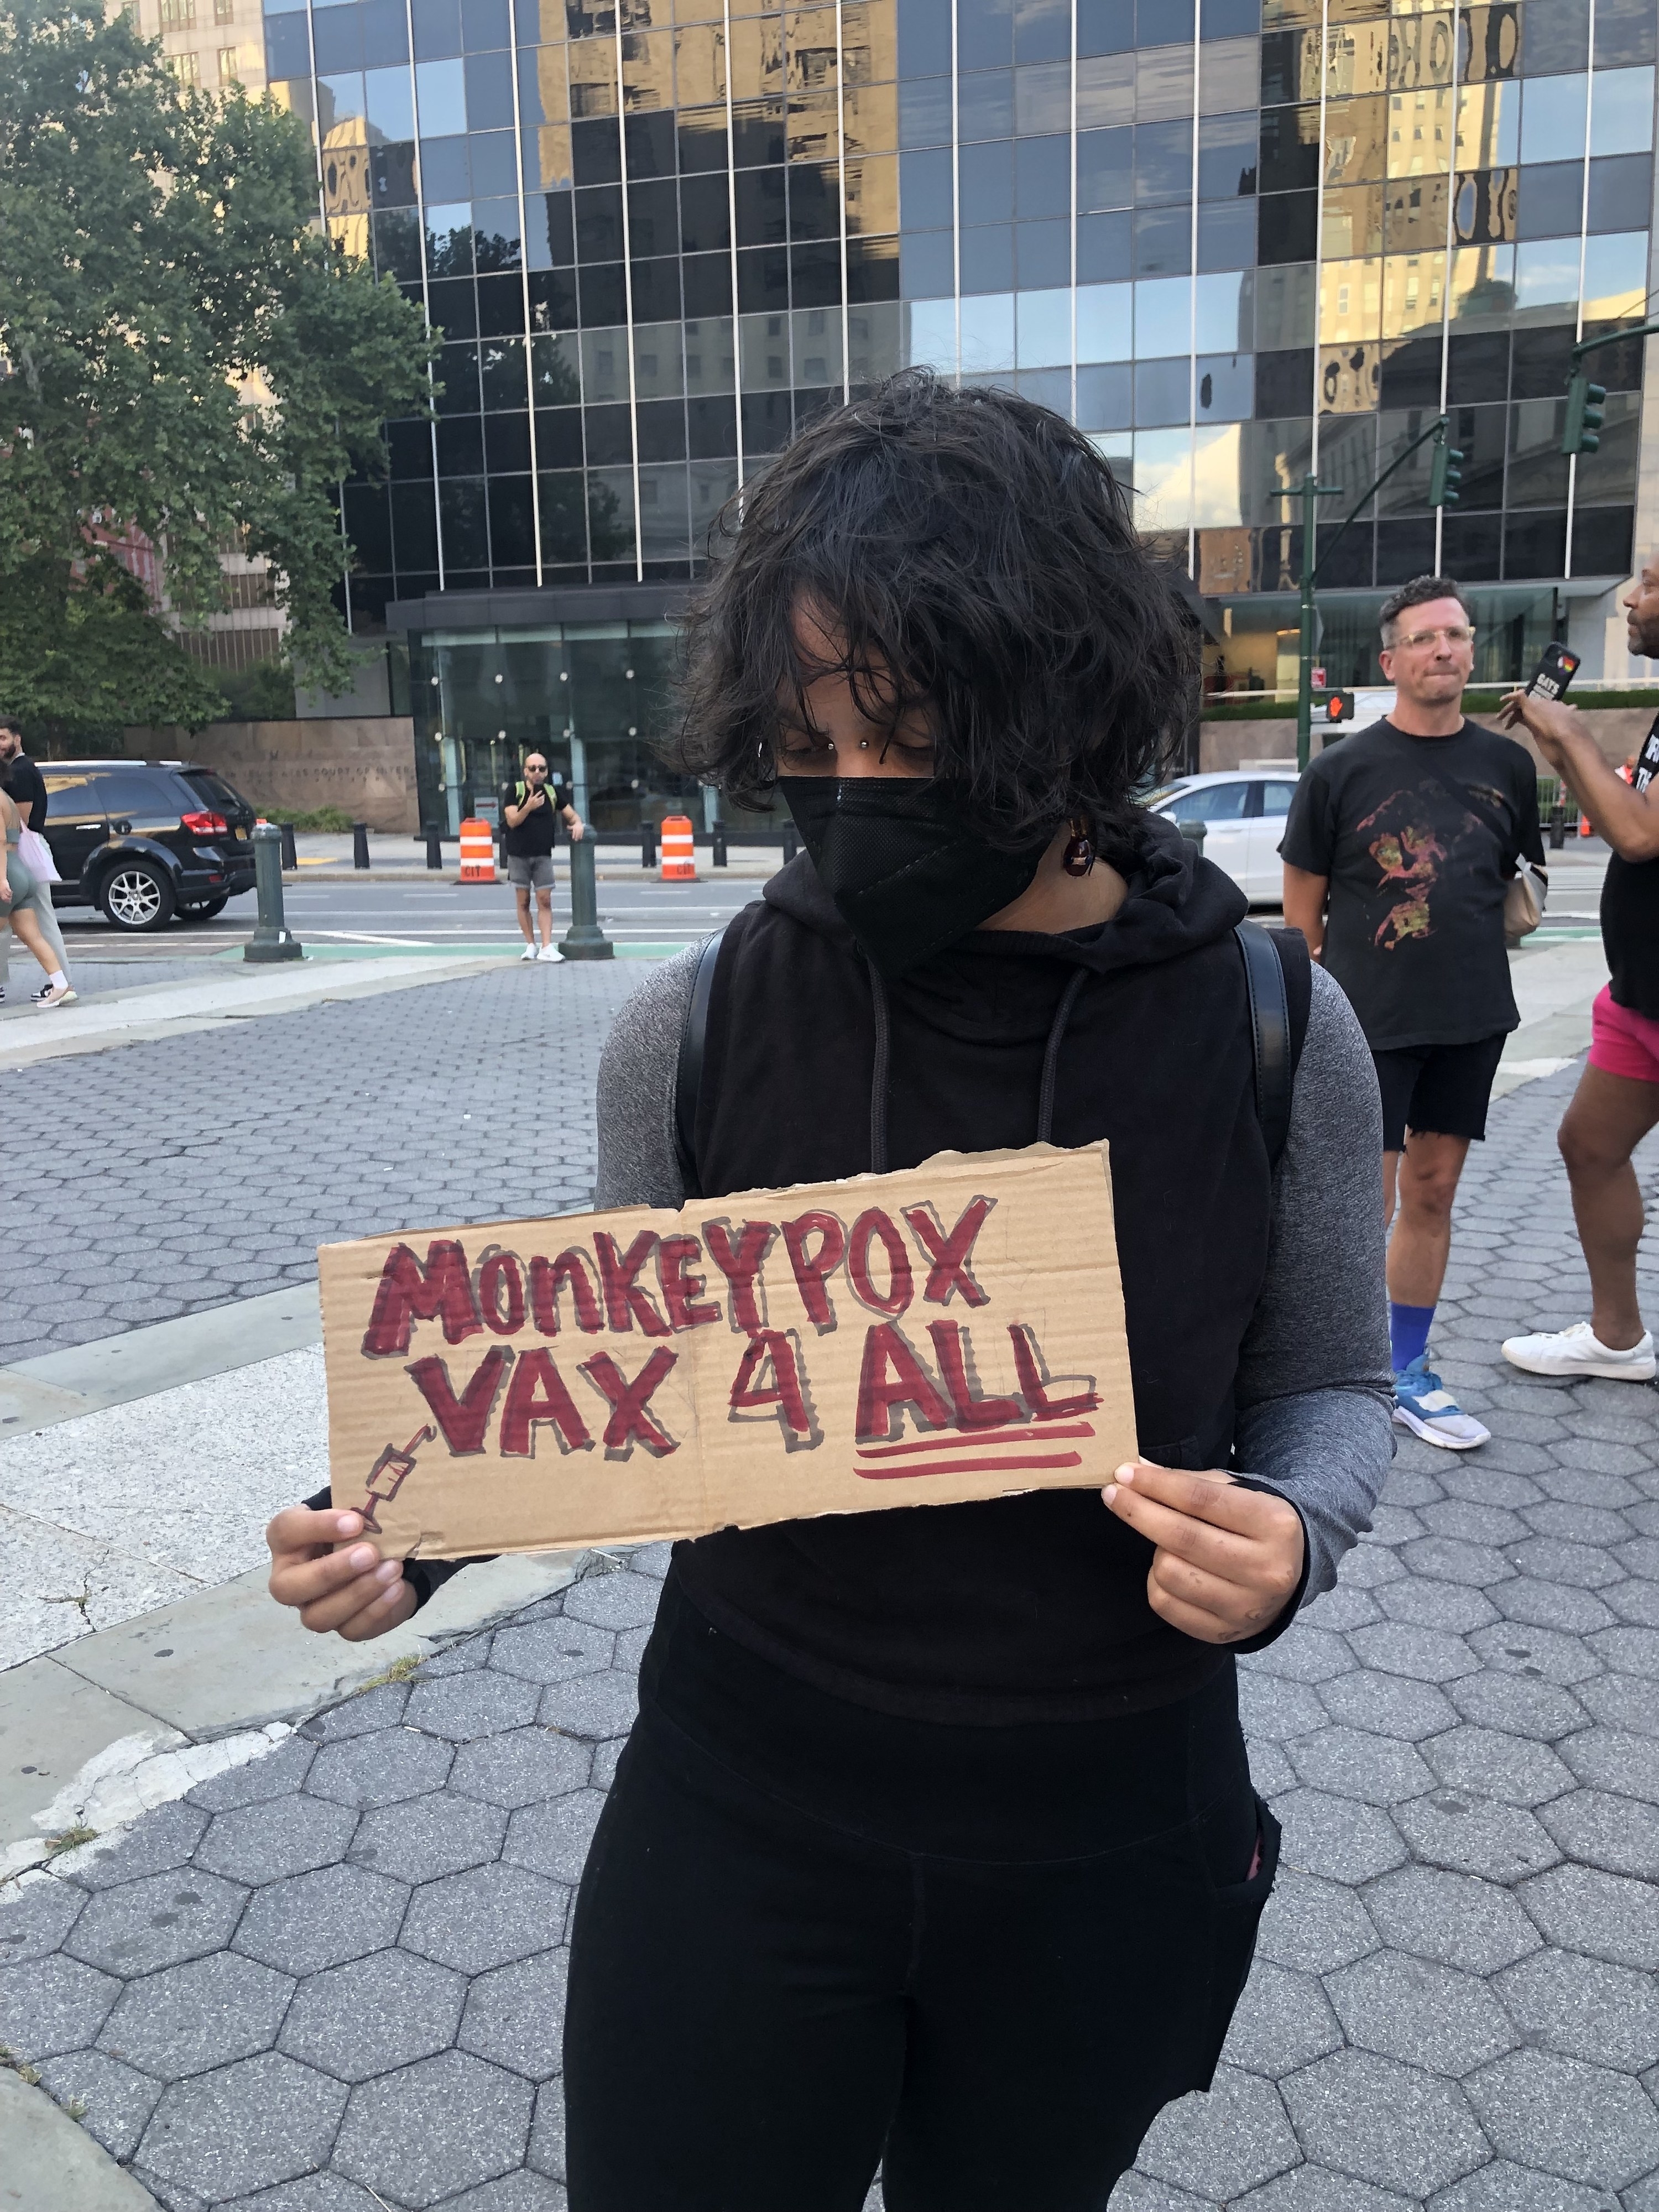 Angel holds their protest sign, &quot;Monkeypox vax 4 all.&quot;